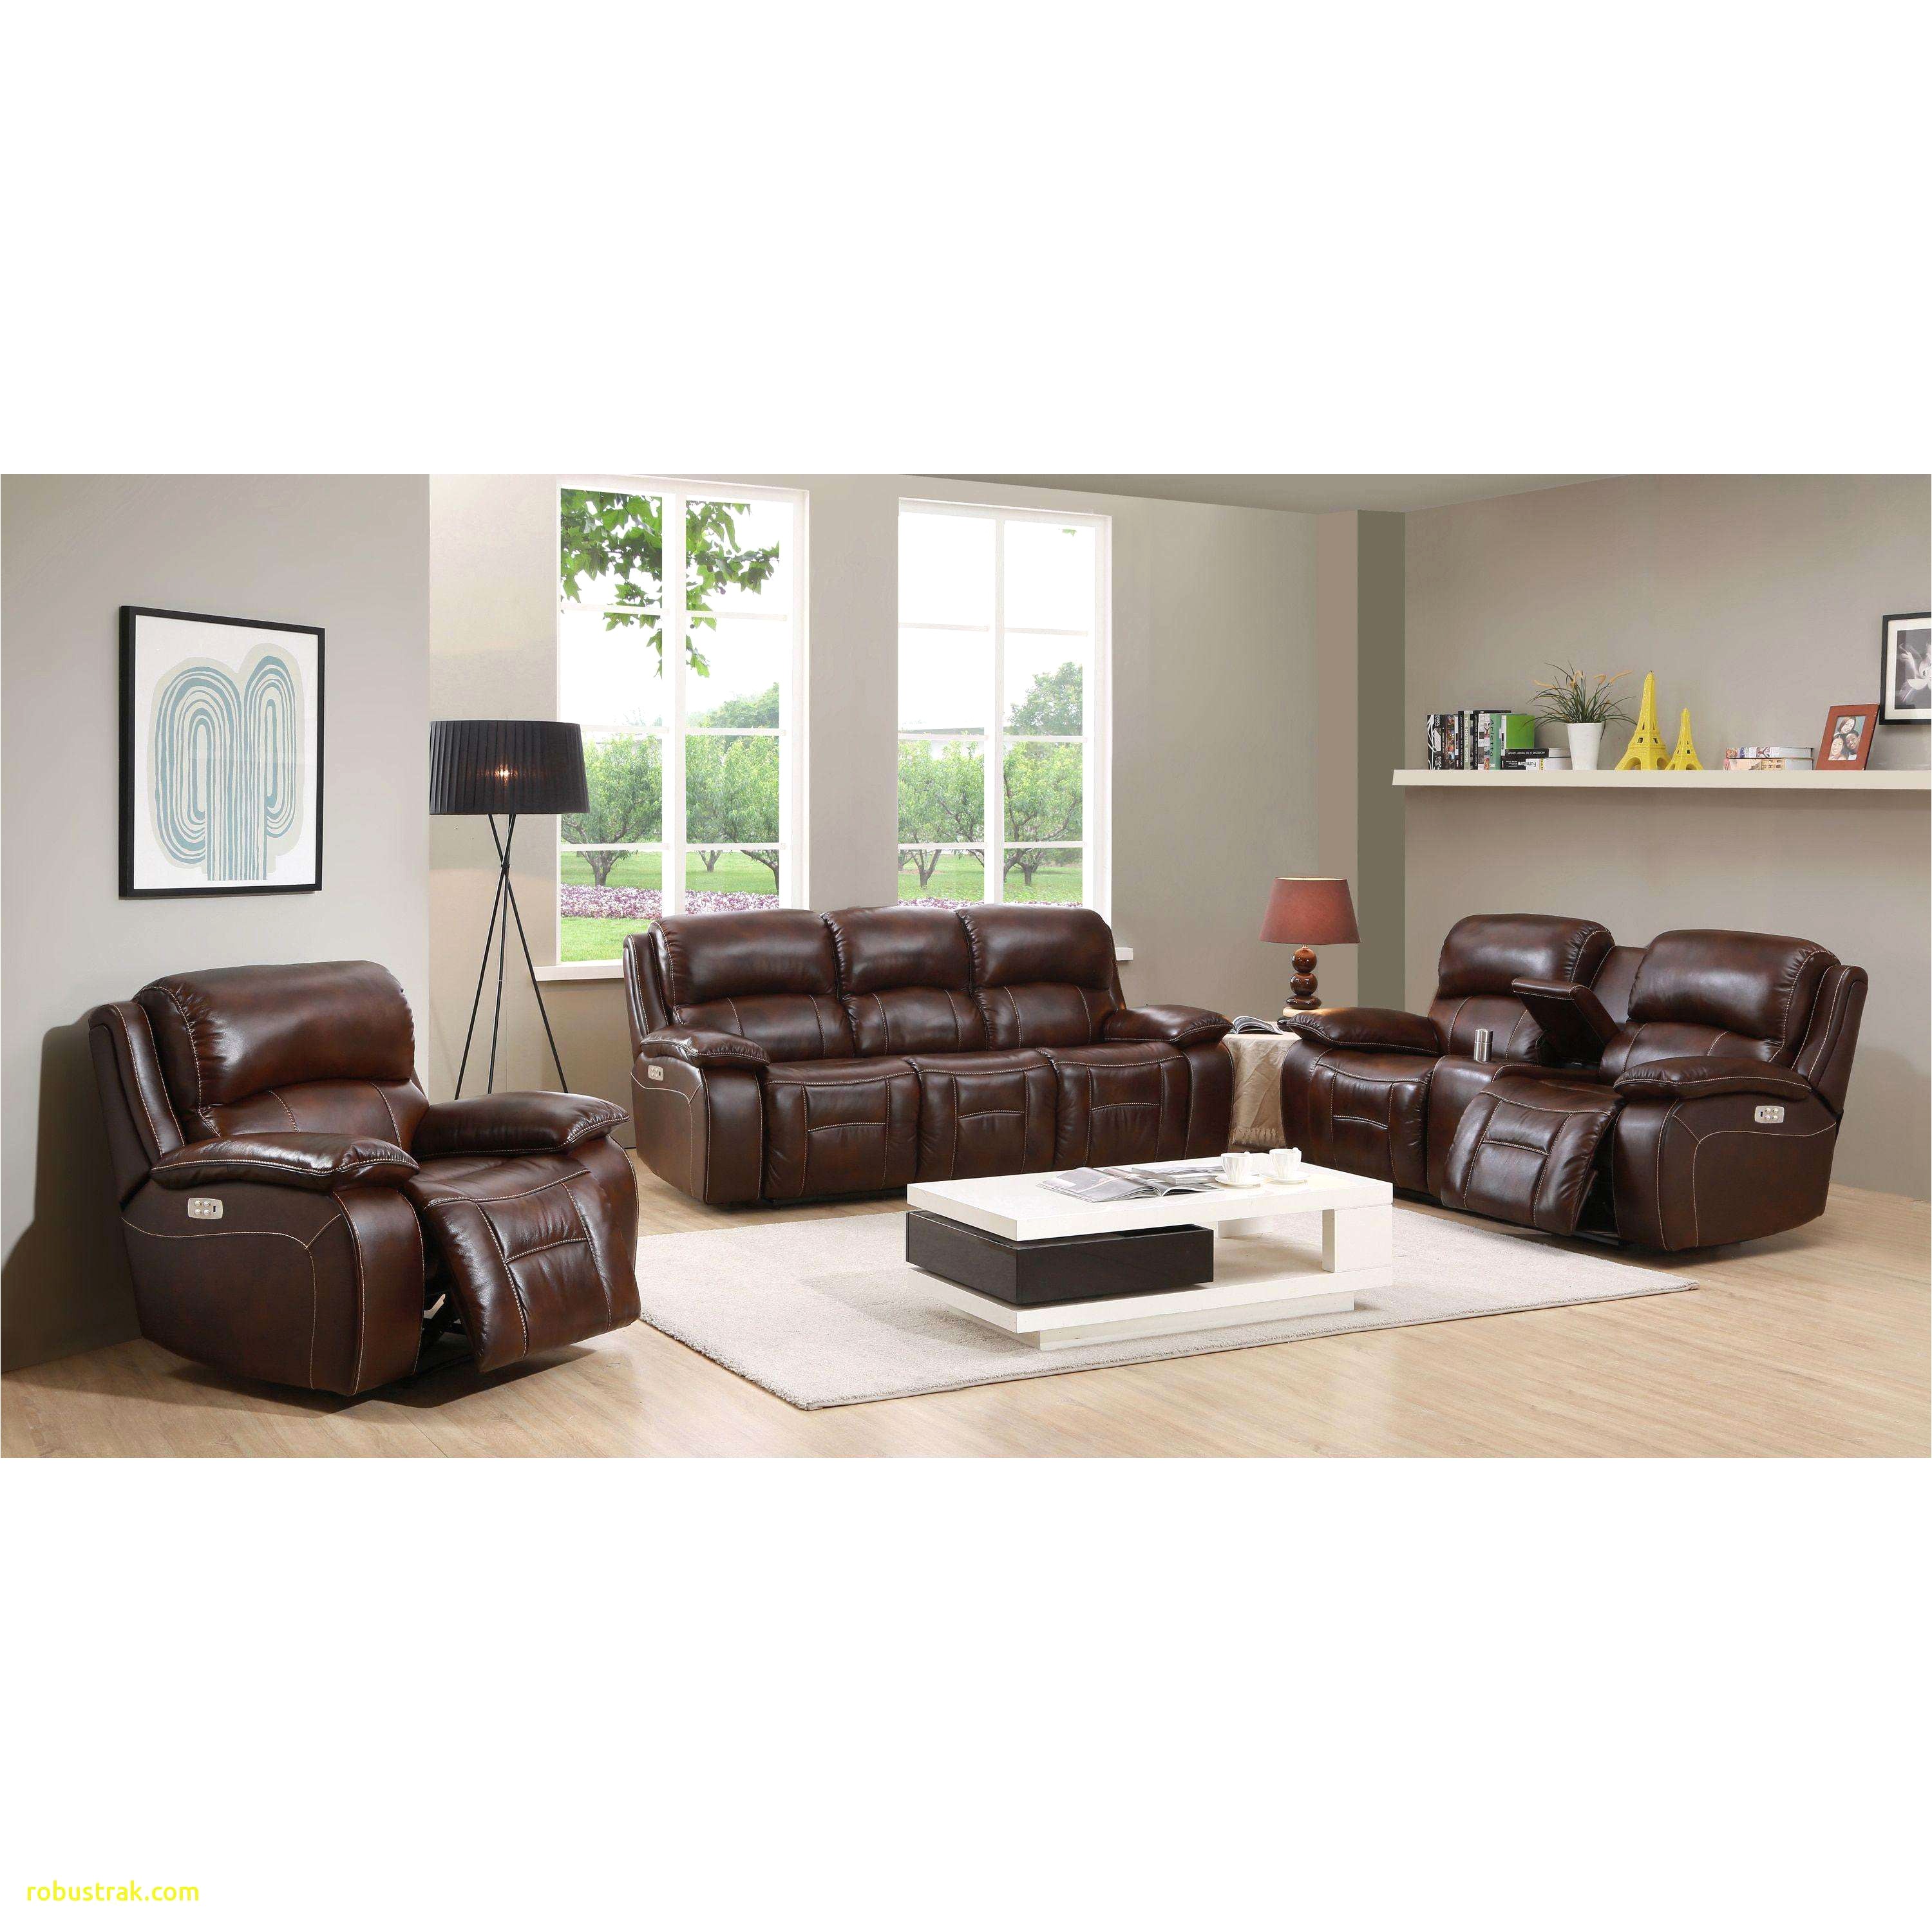 living room leather sofa unique furniture leather couch and loveseat awesome gray loveseat 0d tags